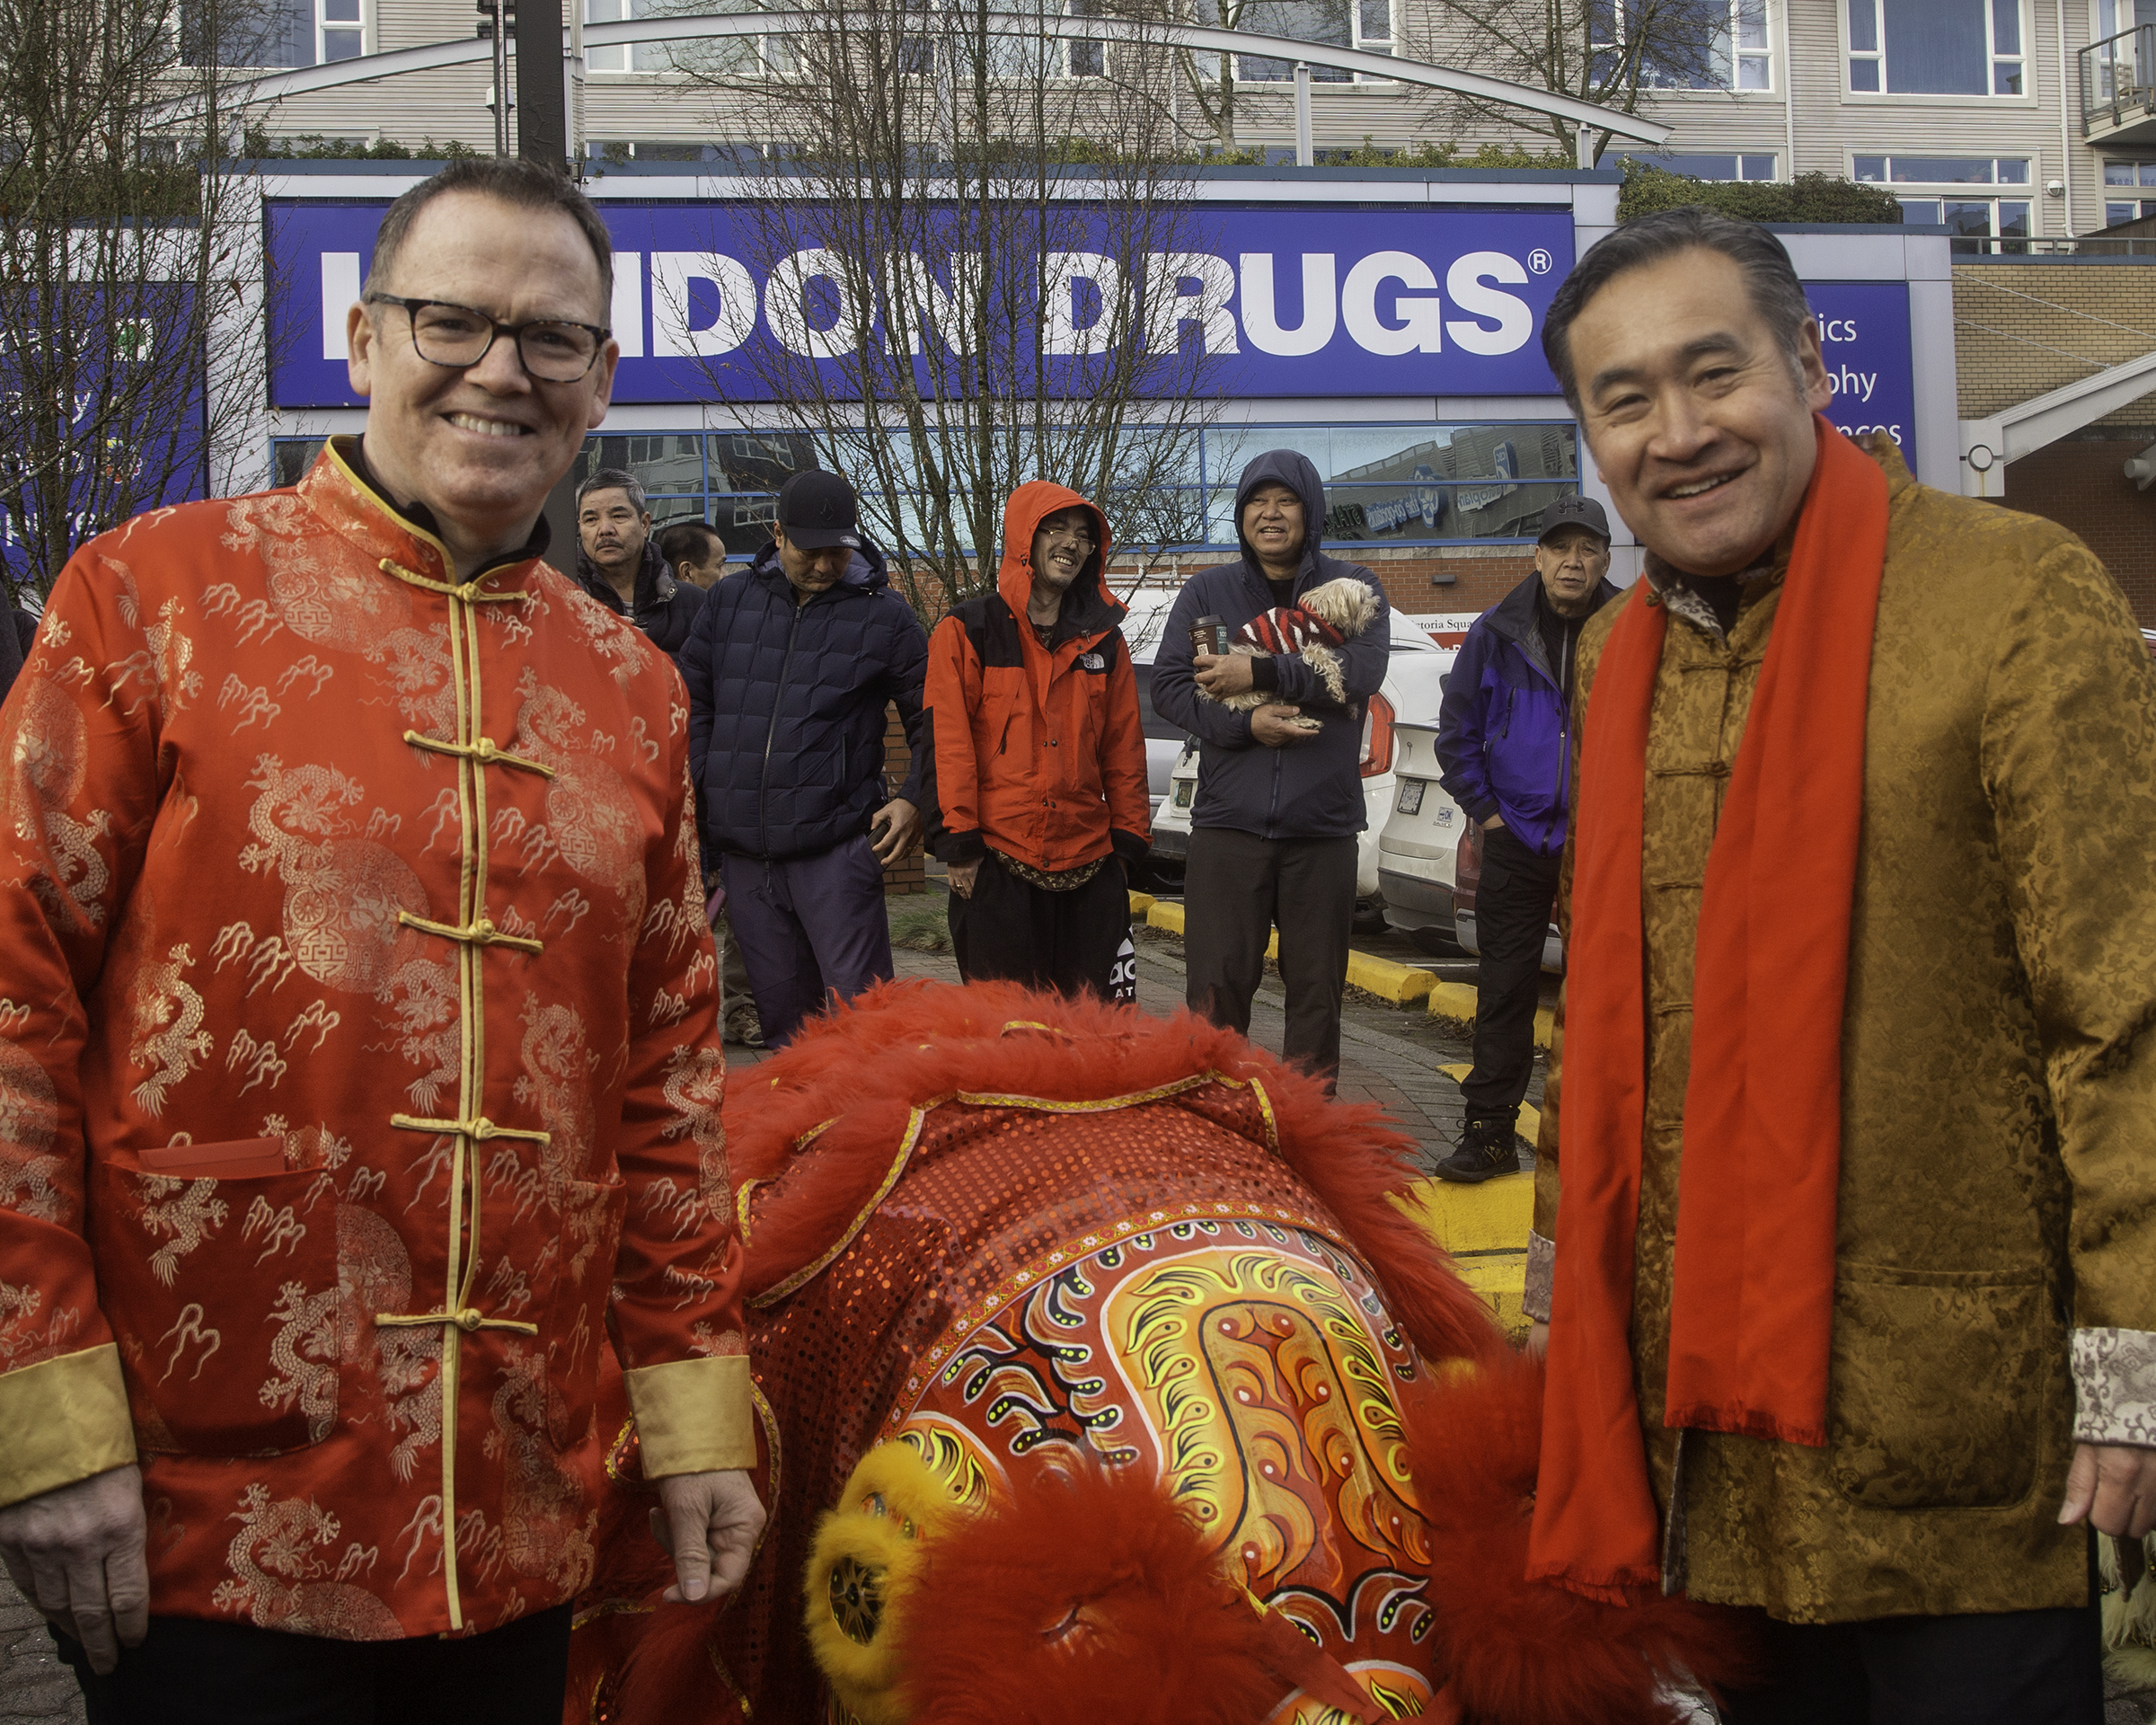 2023-lunar-new-year-celebrations-on-victoria-drive-vancouver-canada_52655648011_o